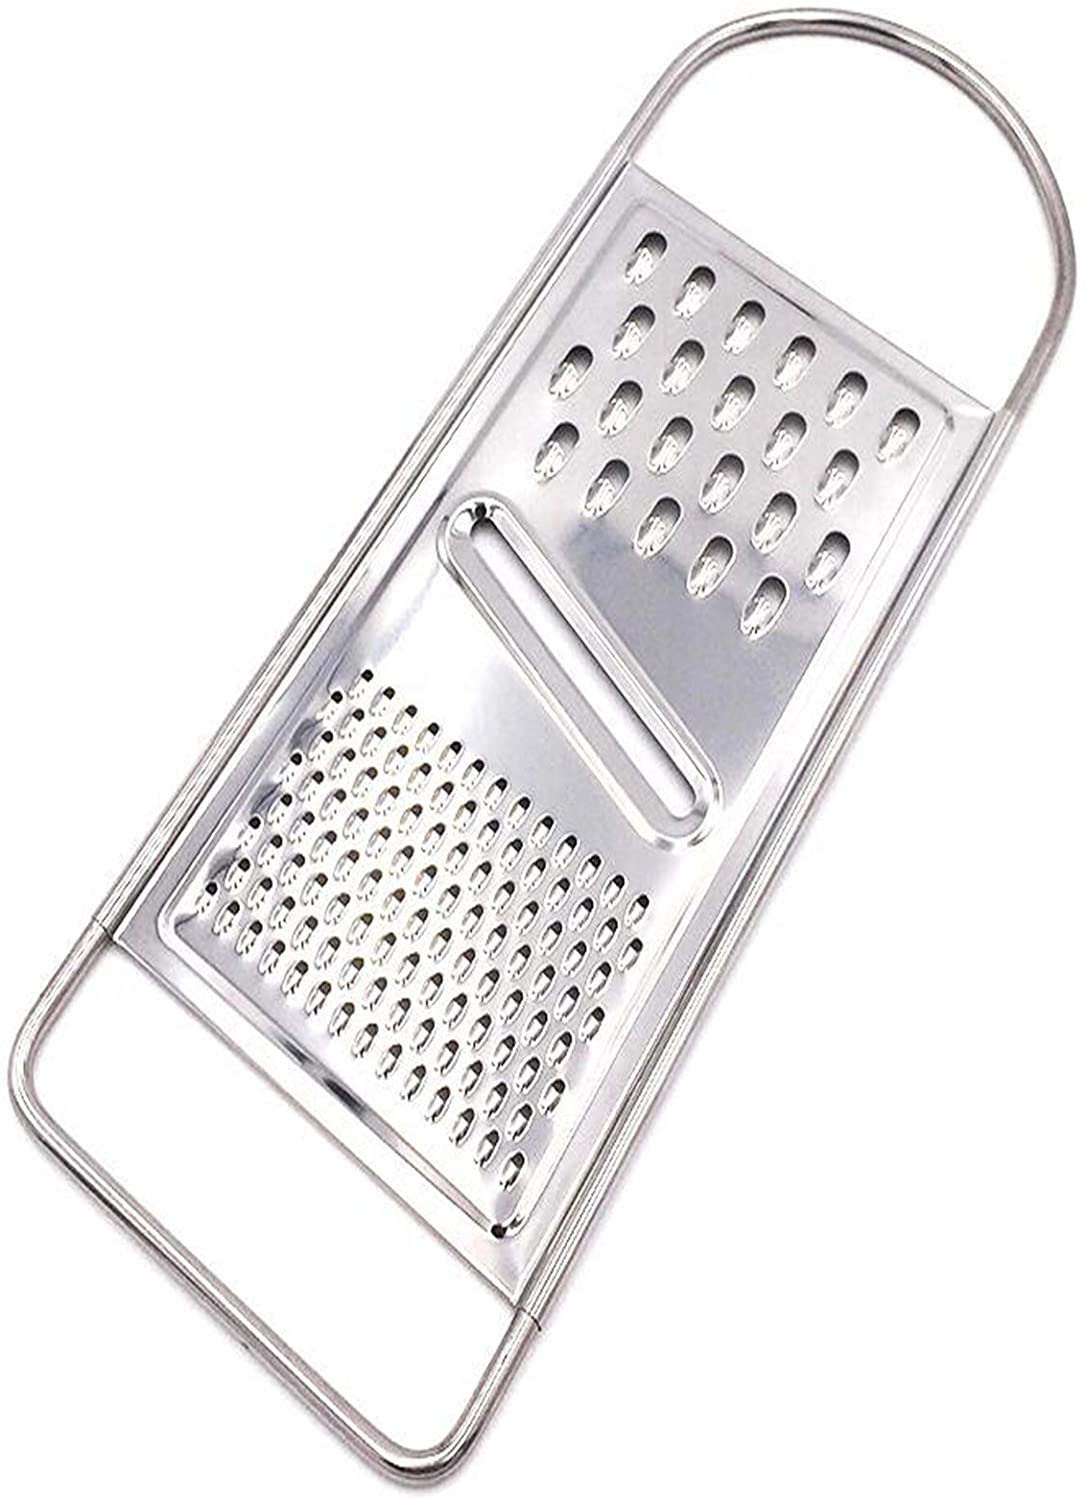 3-Way Stainless Steel Flat Grater In Pakistan